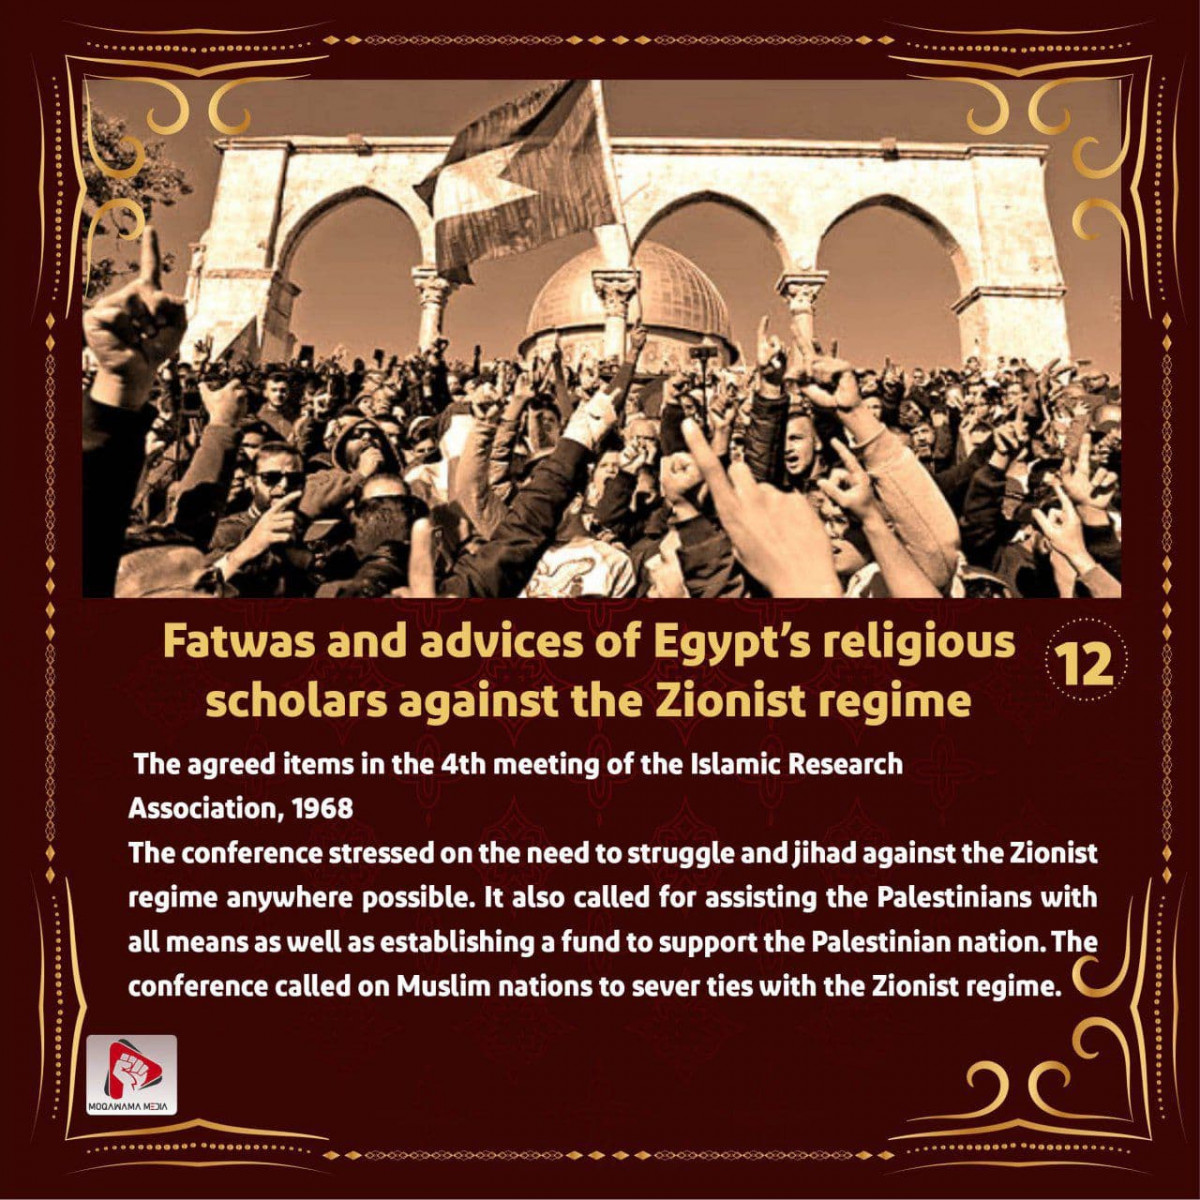 Fatwas and advices of Egypt's religious scholars against the Zionist regime 12